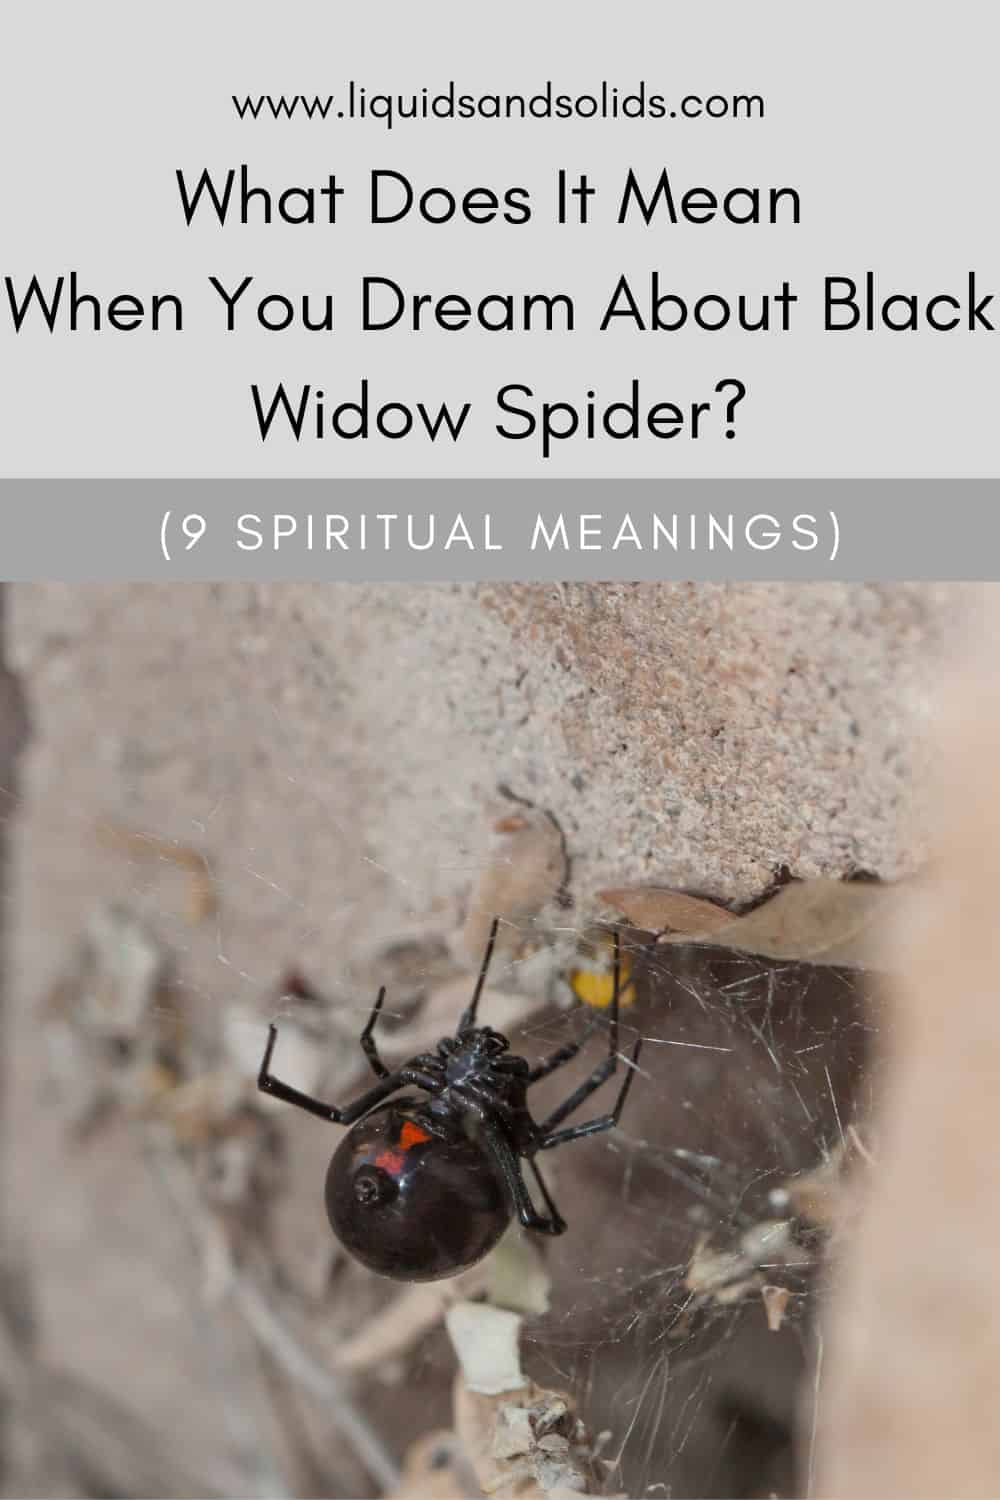 What Does It Mean When You Dream About Black Widow Spider? (9 Spiritual Meanings)